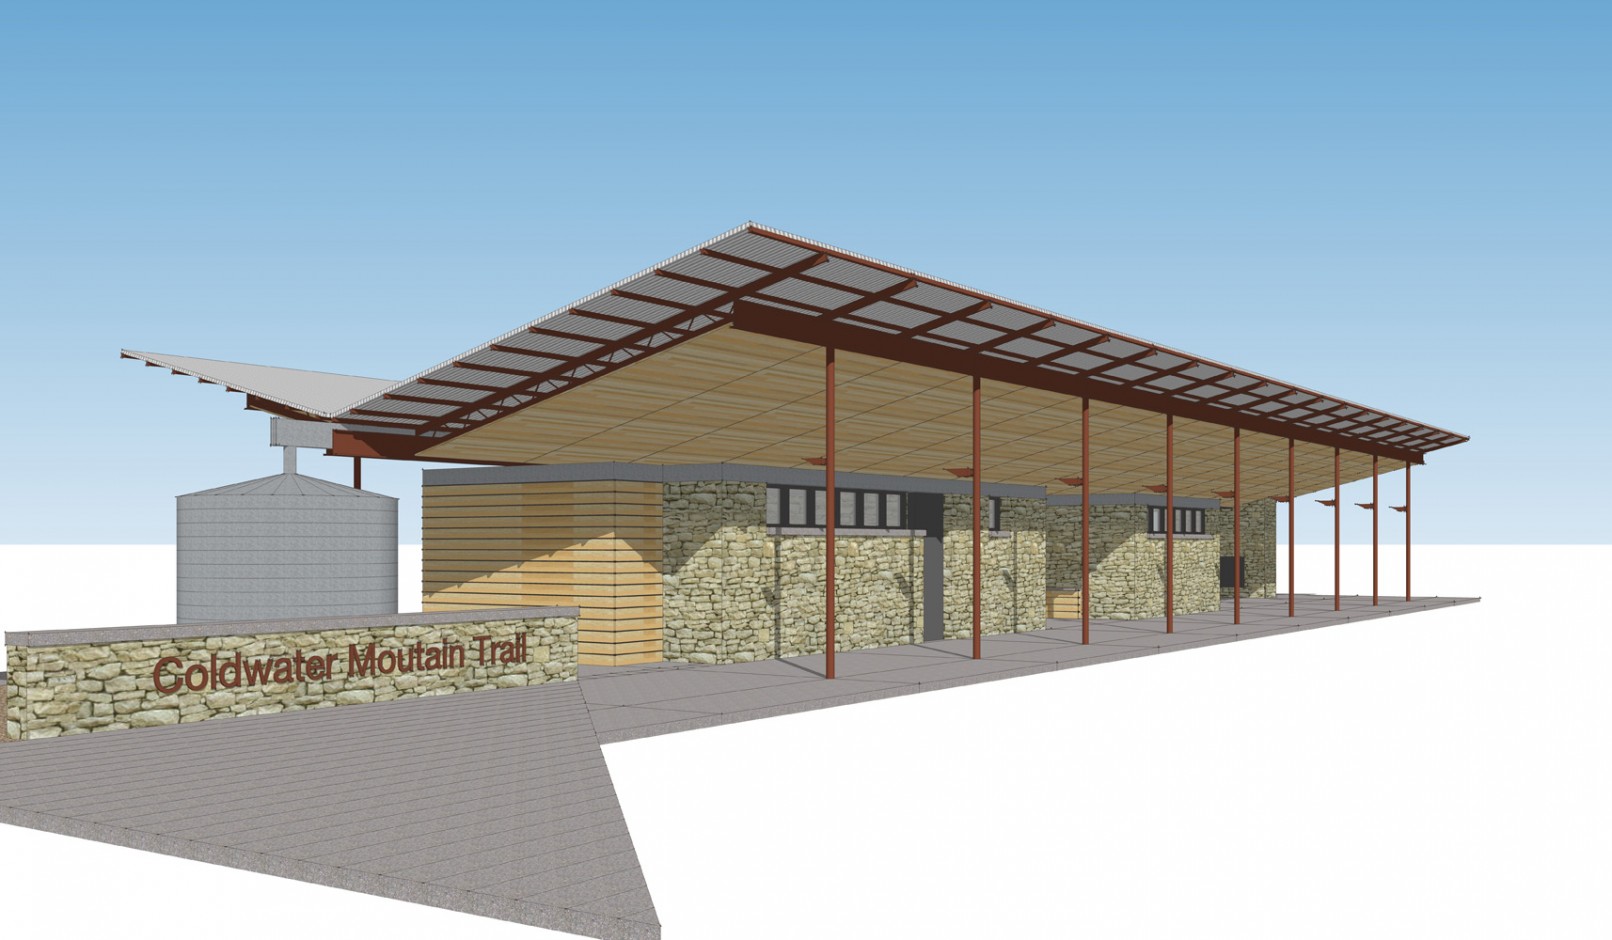 Coldwater Mountain Trailhead Perspective Rendering Option A